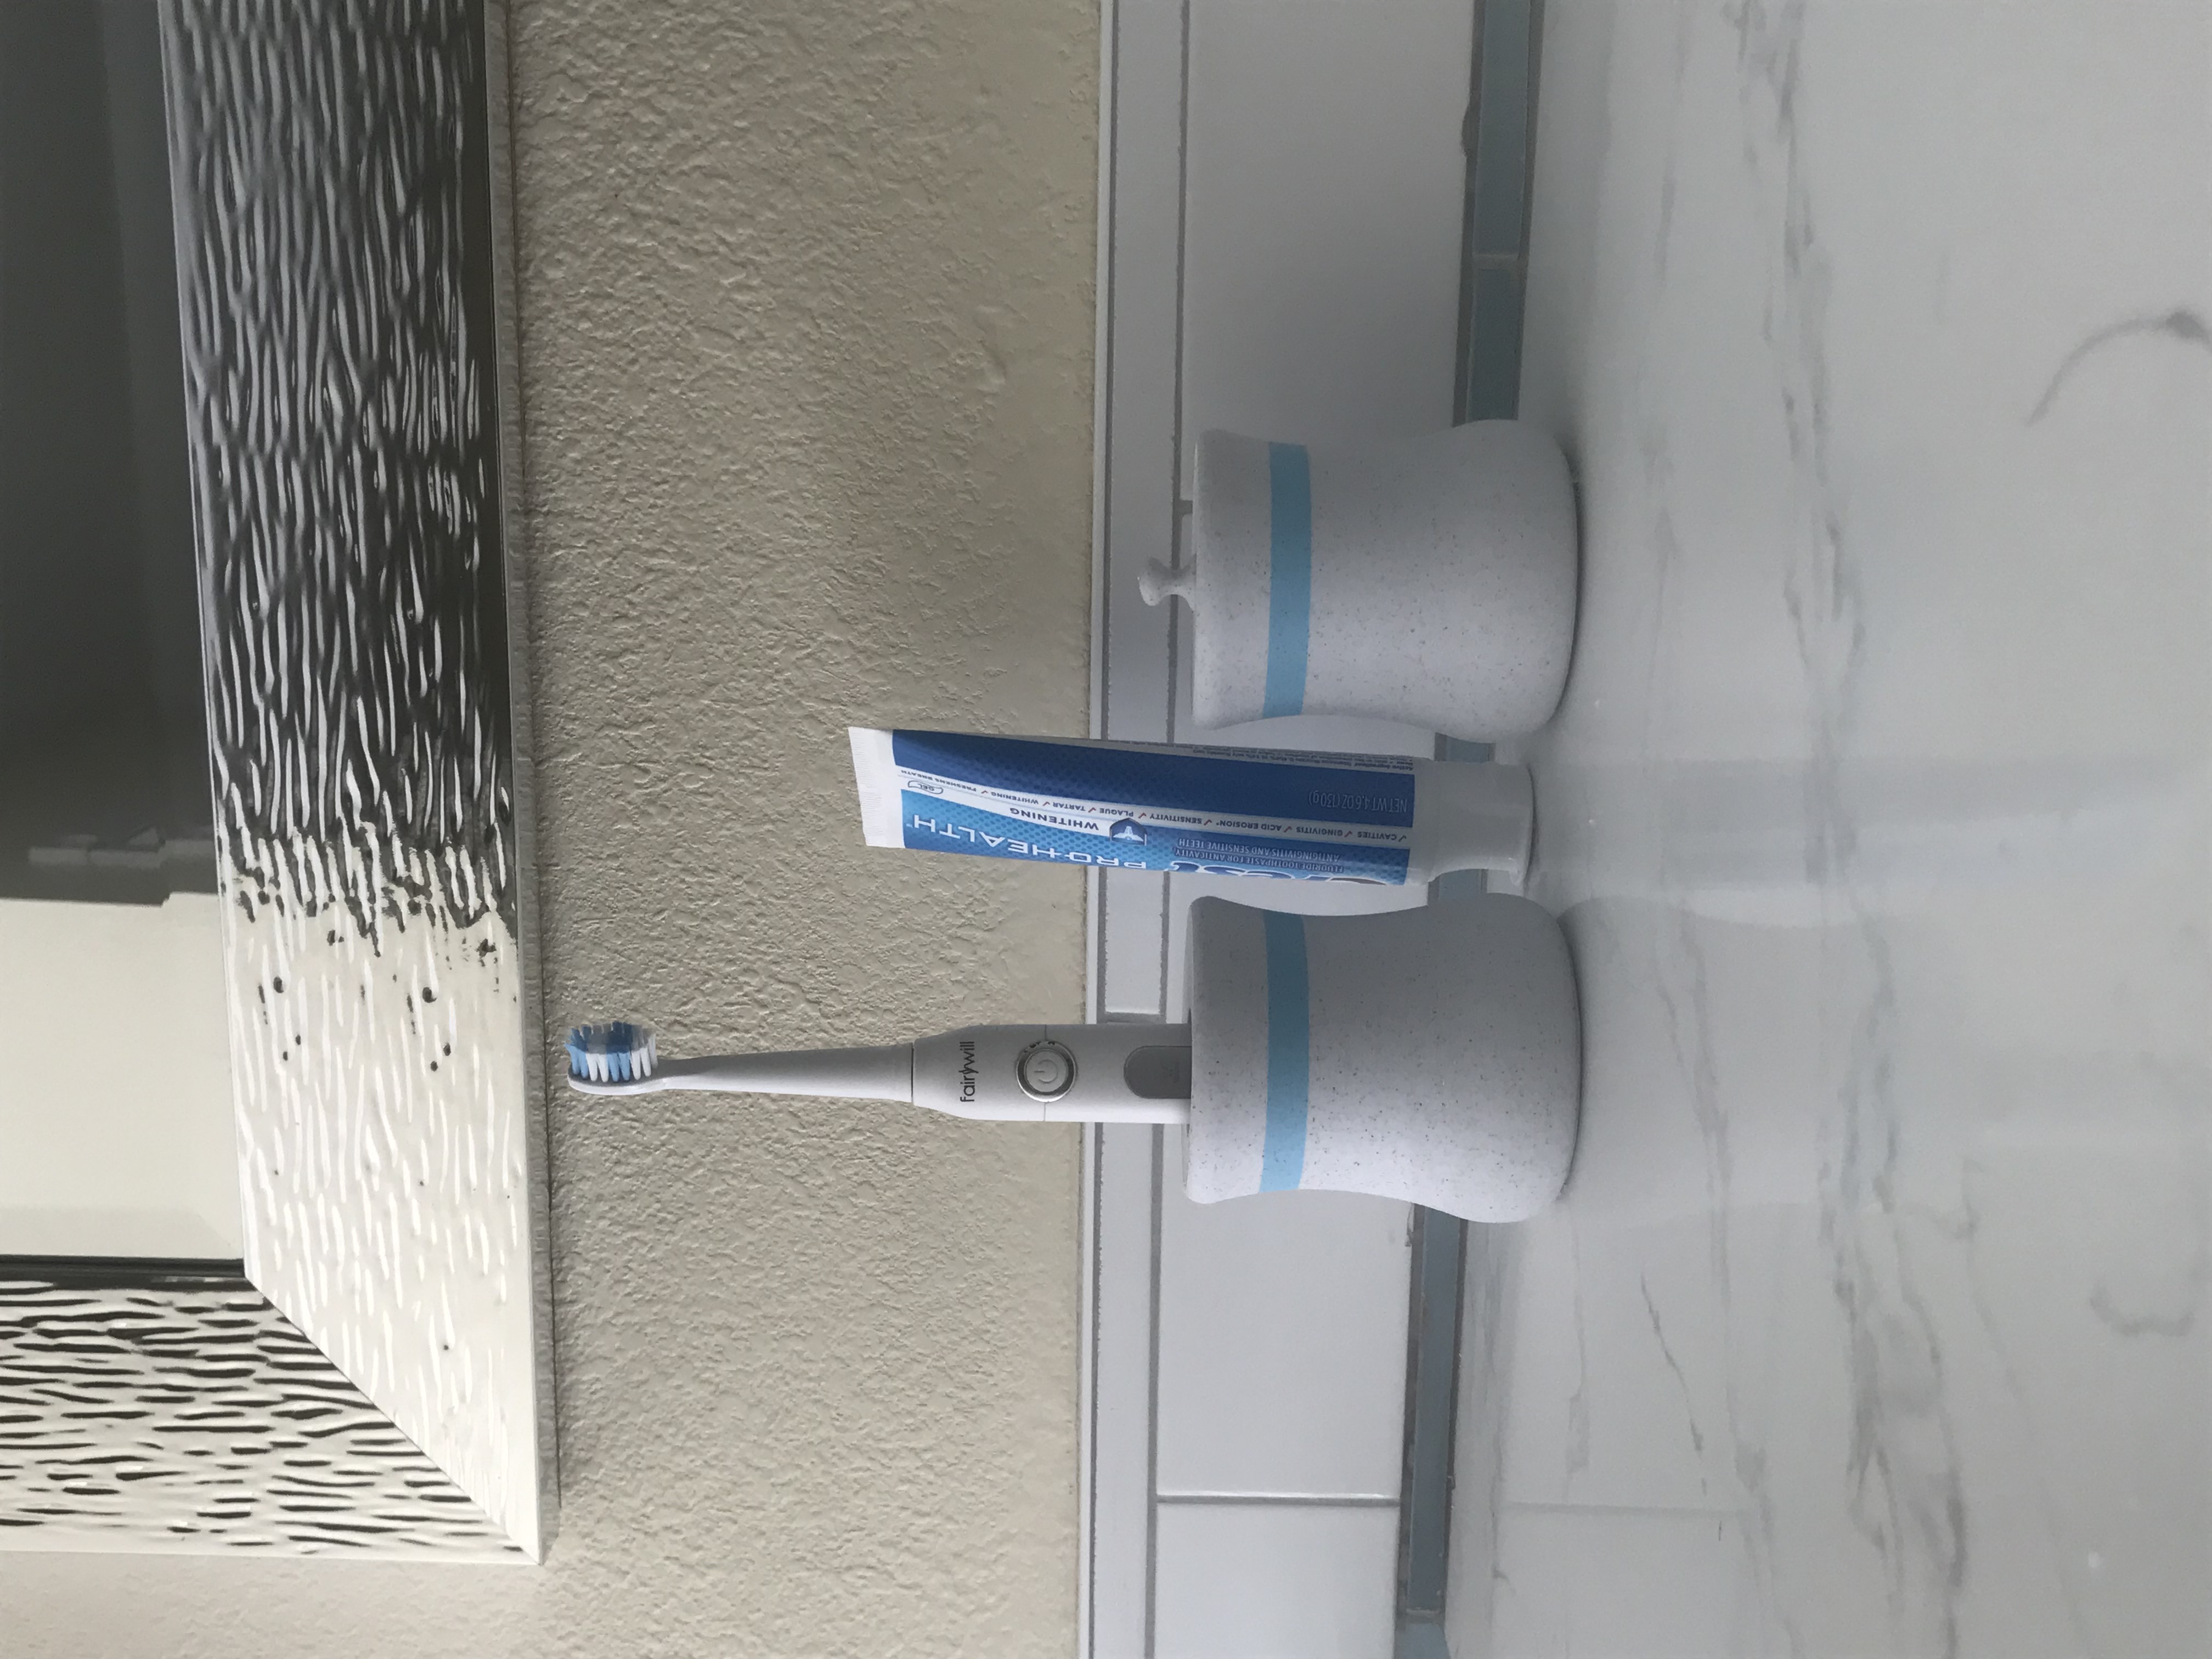 Toothbrush Holder with Different Lids